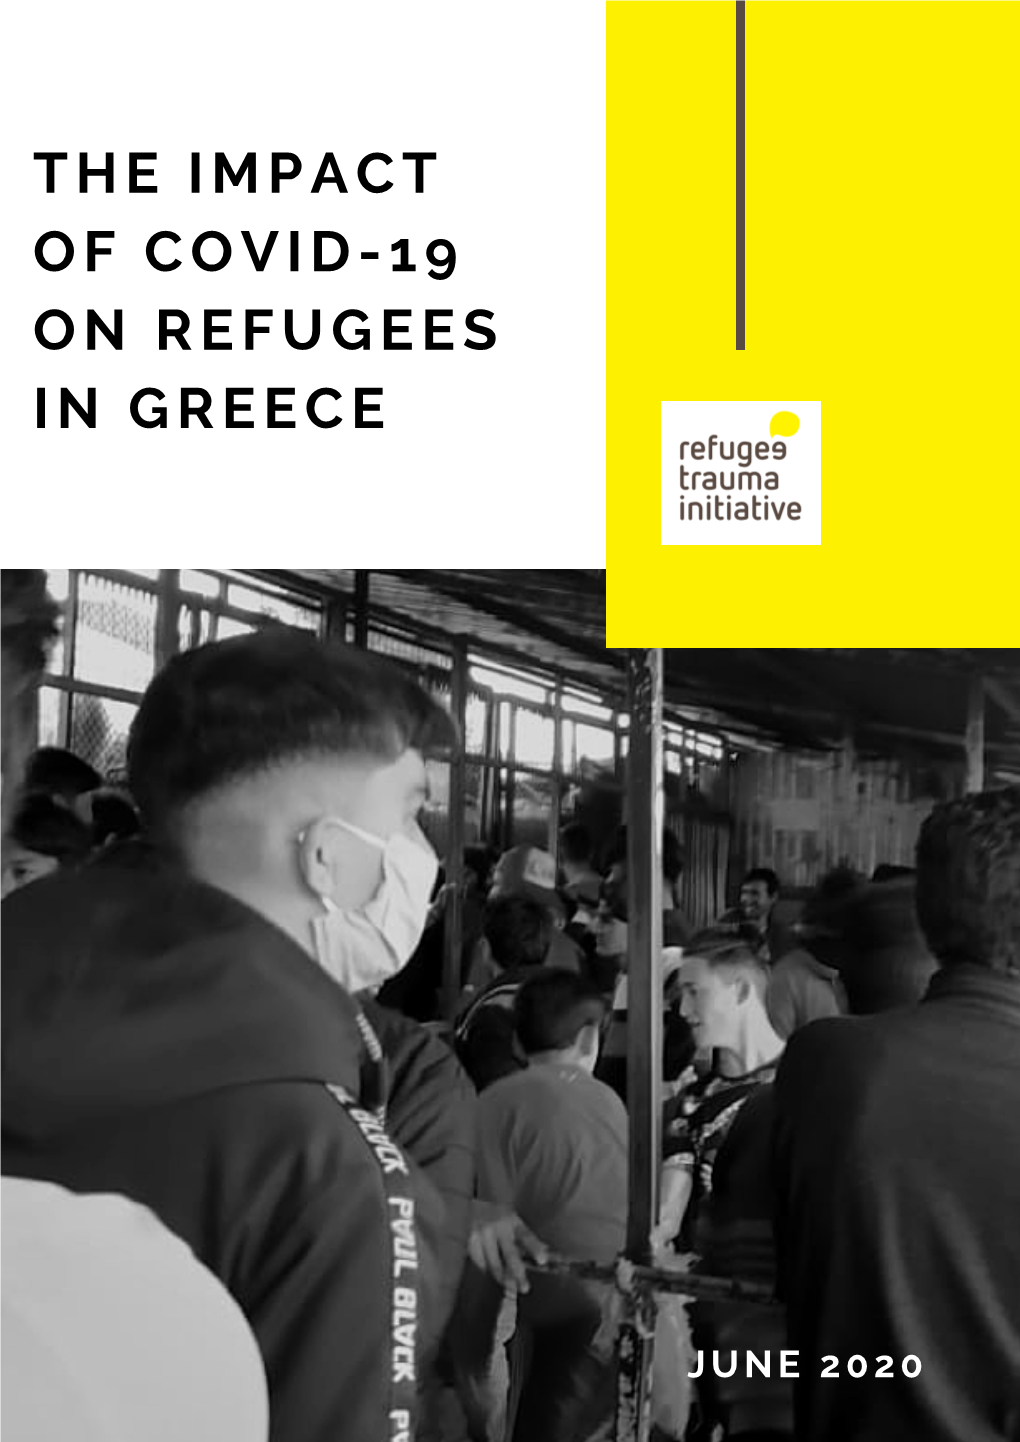 The Impact of Covid-19 on Refugees in Greece